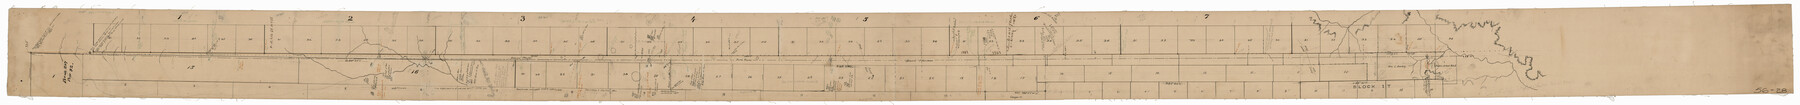 93142, [North line of County], Twichell Survey Records